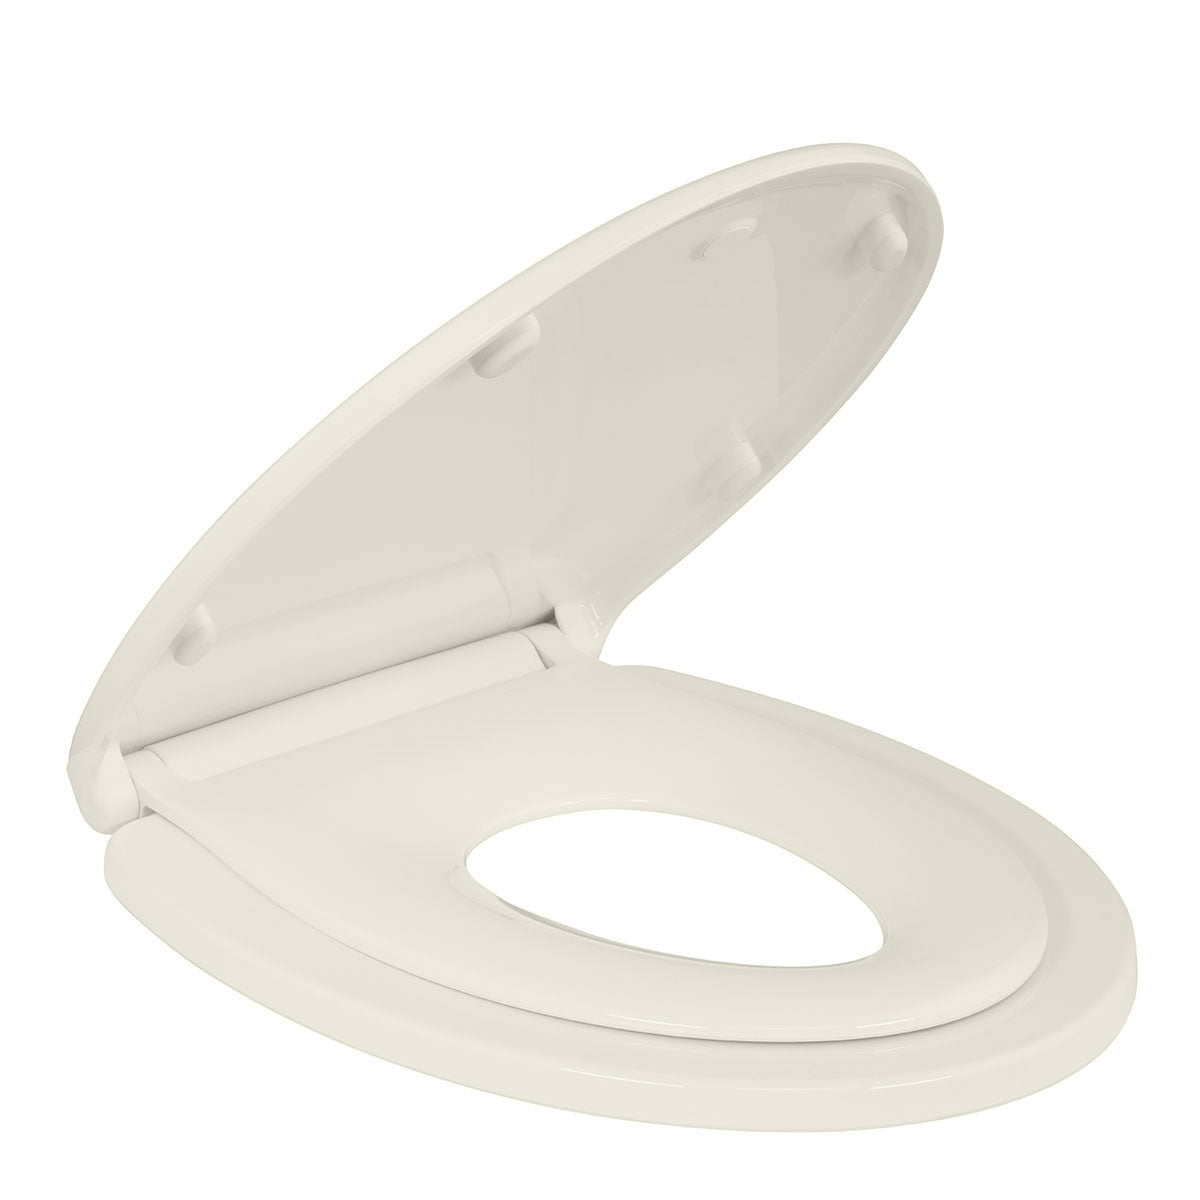 Biscuit/Linen Elongated Kingsport Family Toilet Seat with Built-In Child Seat